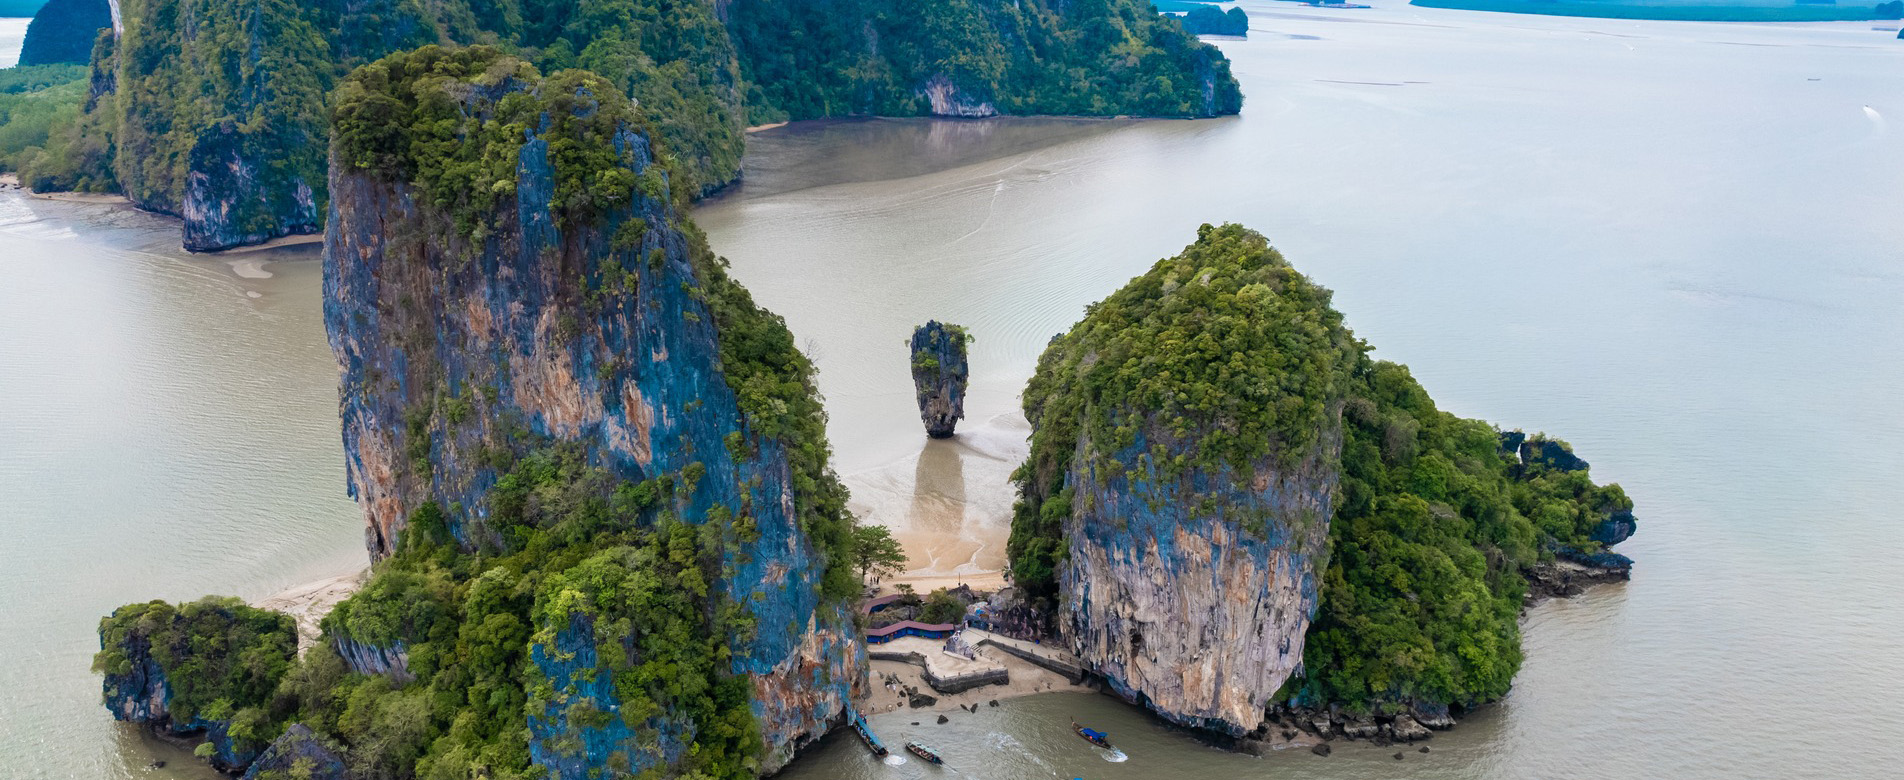 One Day Trip to James Bond Island Tour from Phuket 2023 - Ticket2Attraction